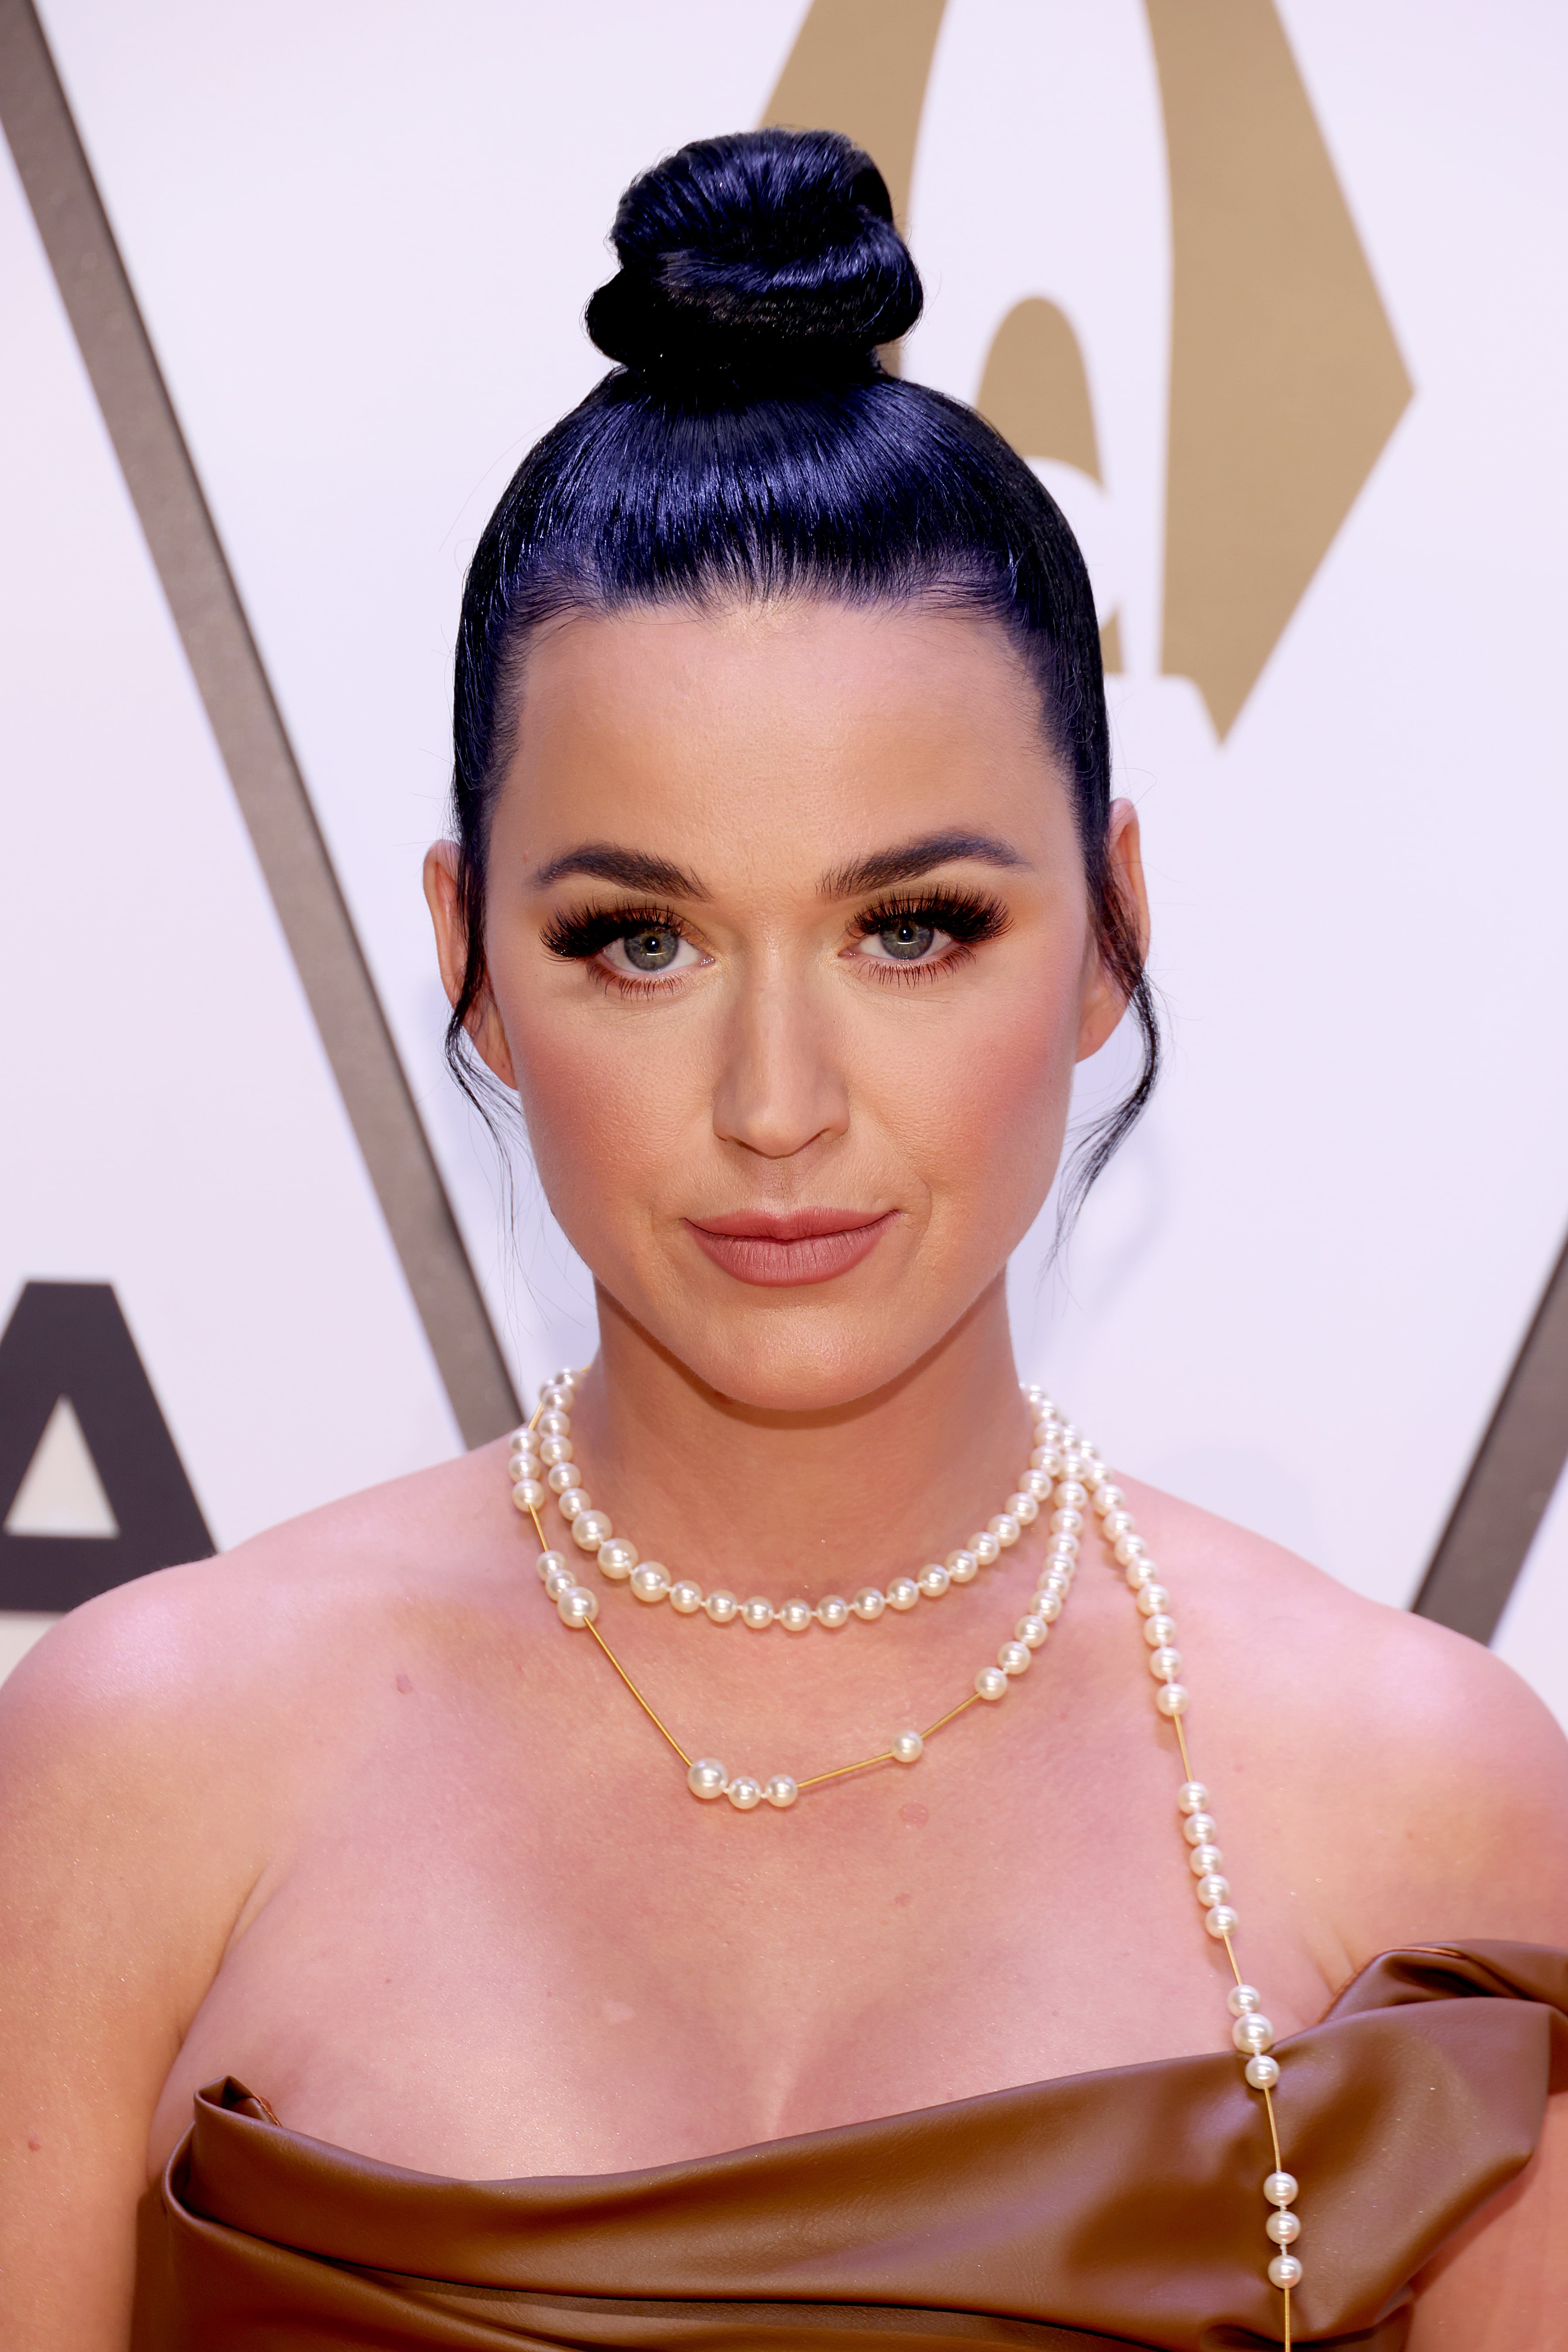 Katy Perry Before and After: From 2000 to 2023 - The Skincare Edit